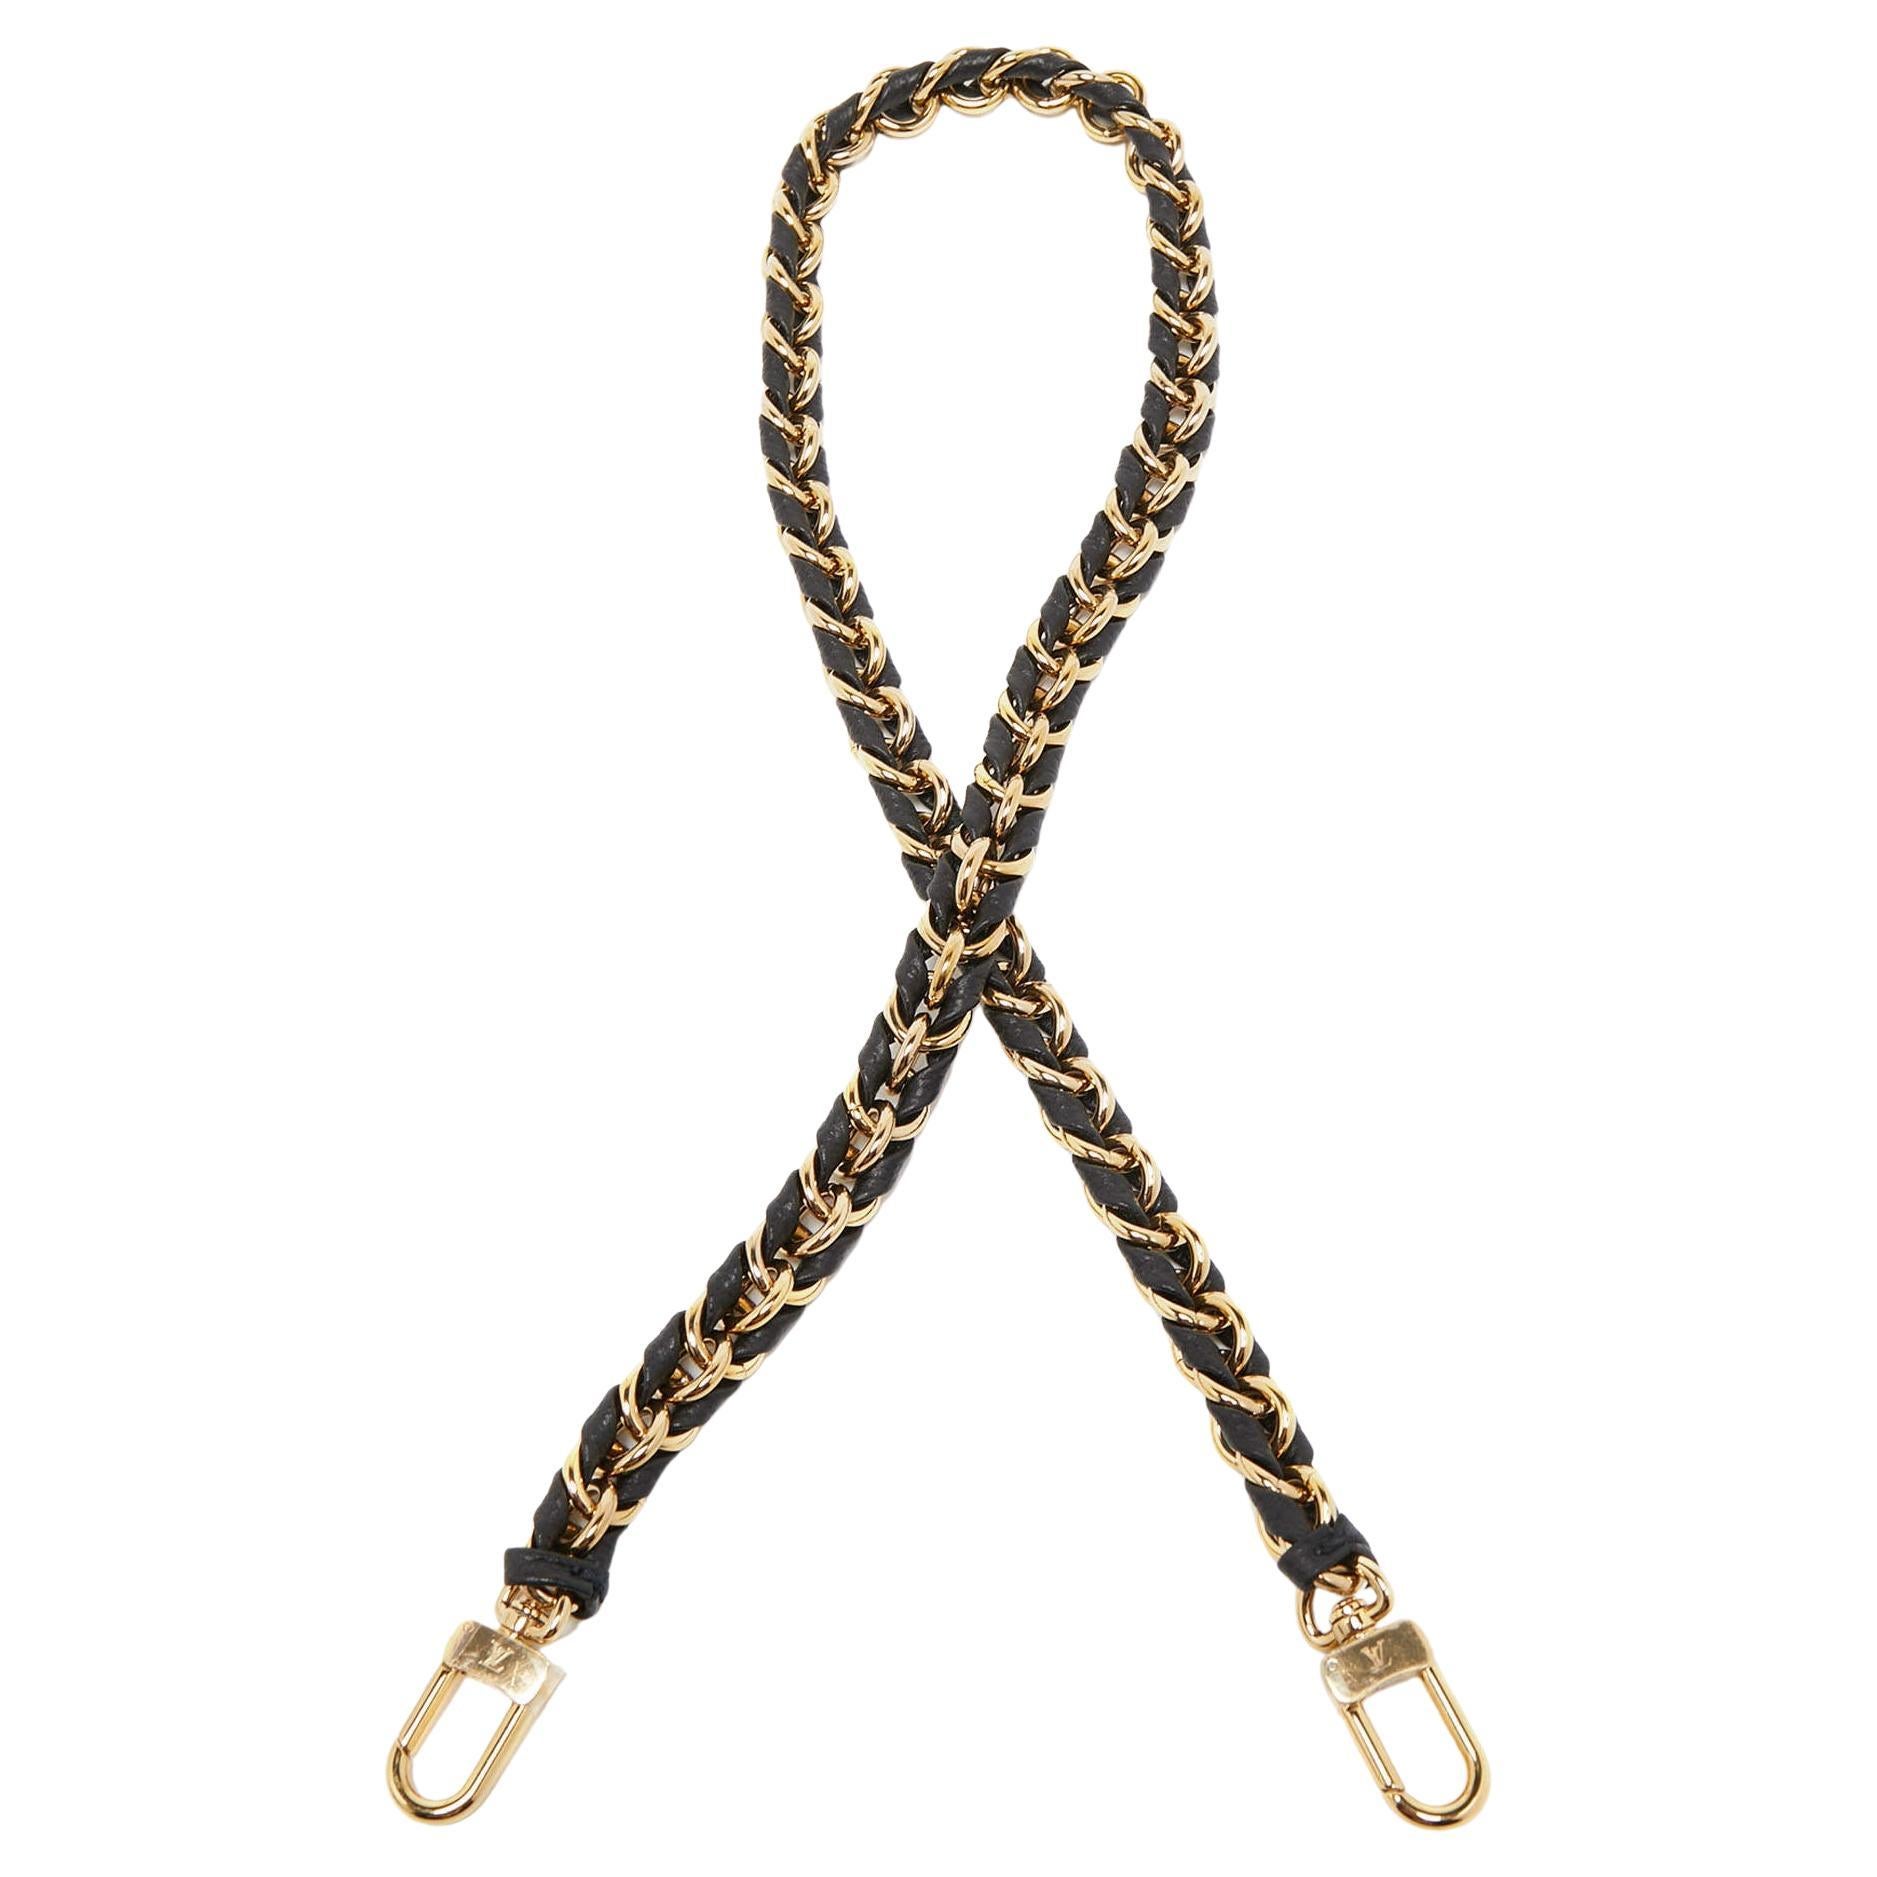 Sold at Auction: Louis Vuitton Pre-Fall 2021 Multipochette Lanyard